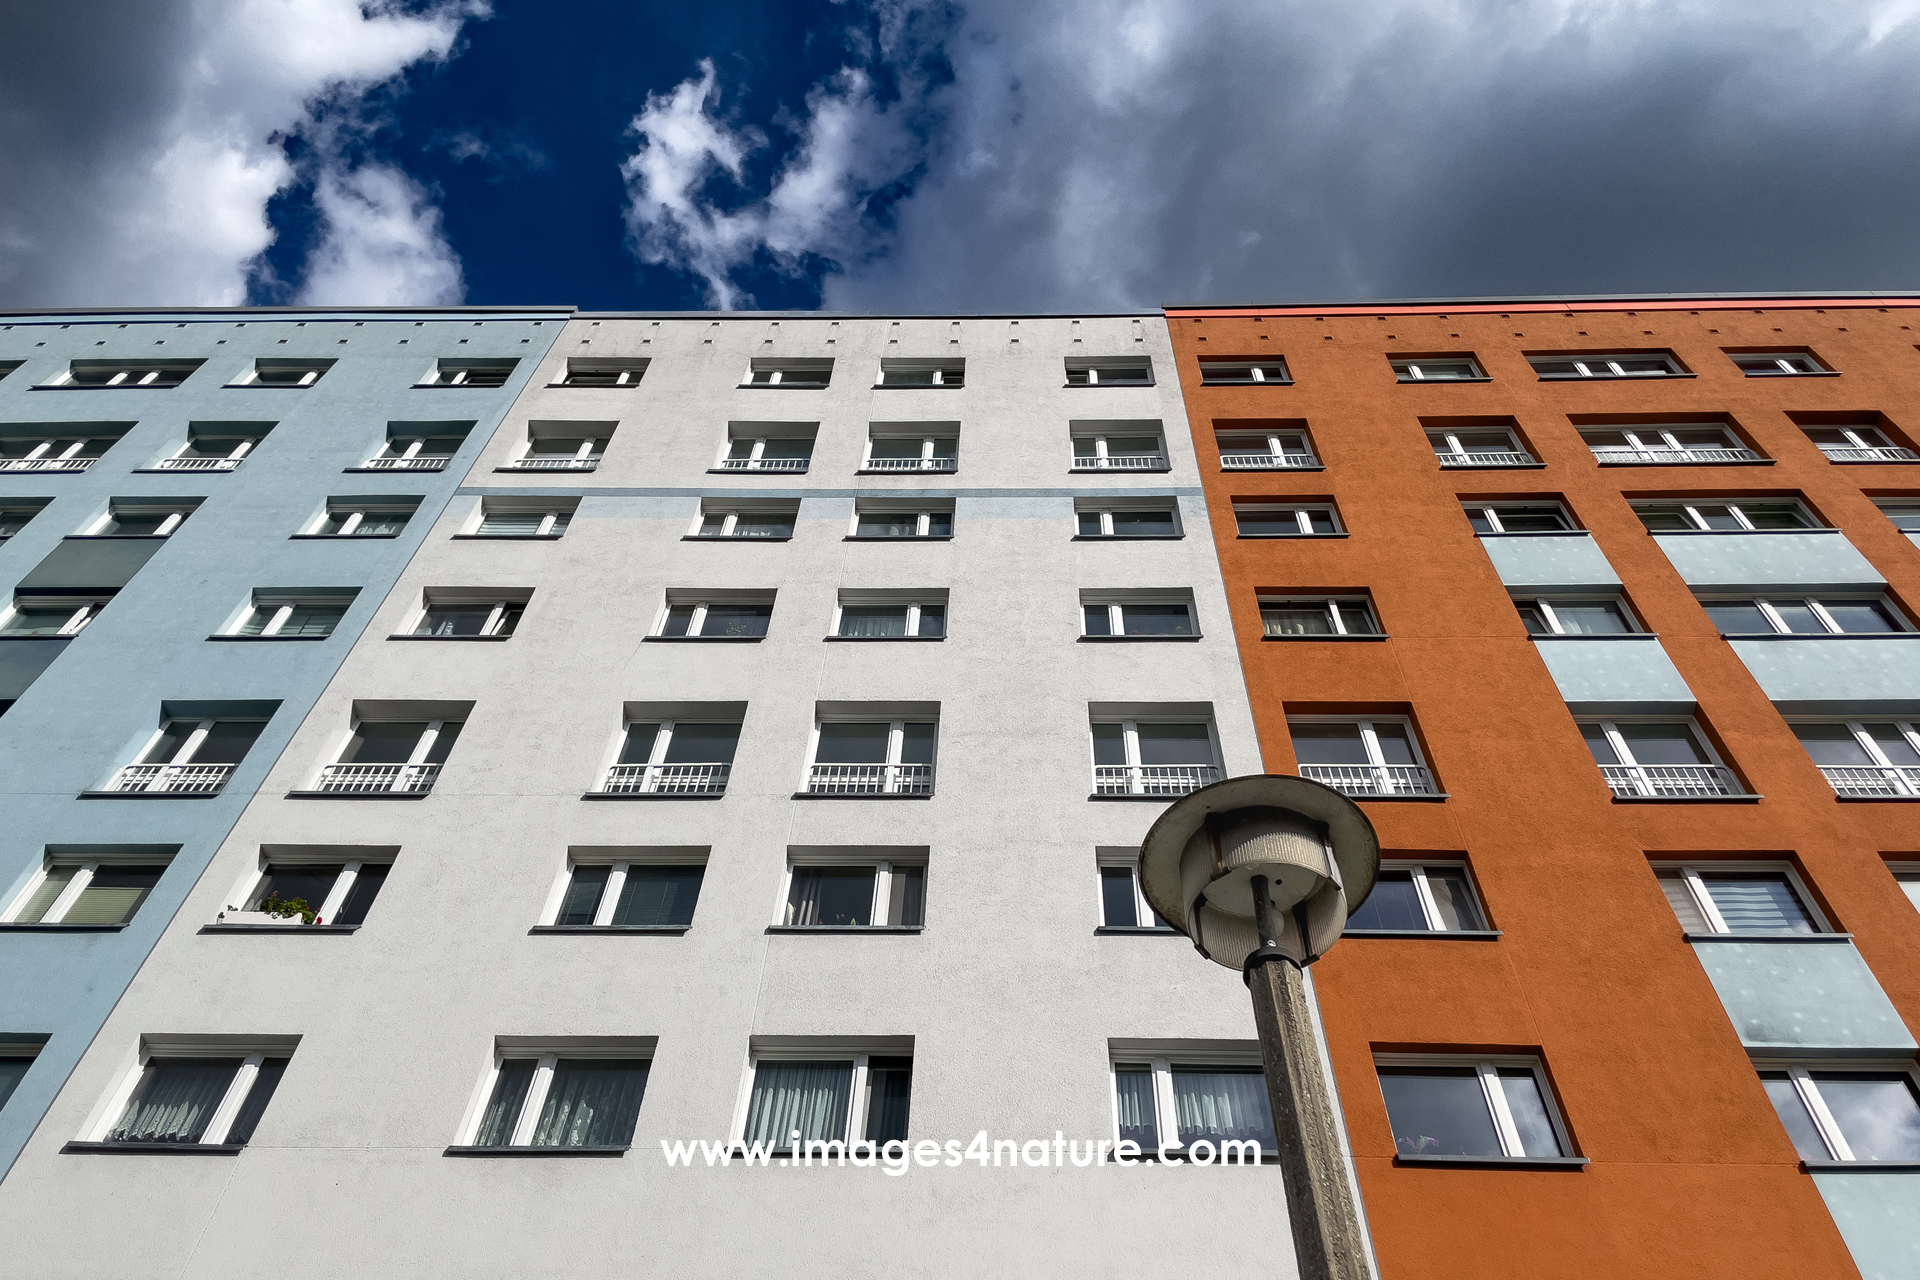 Low angle view of large and colorful Berlin residential building